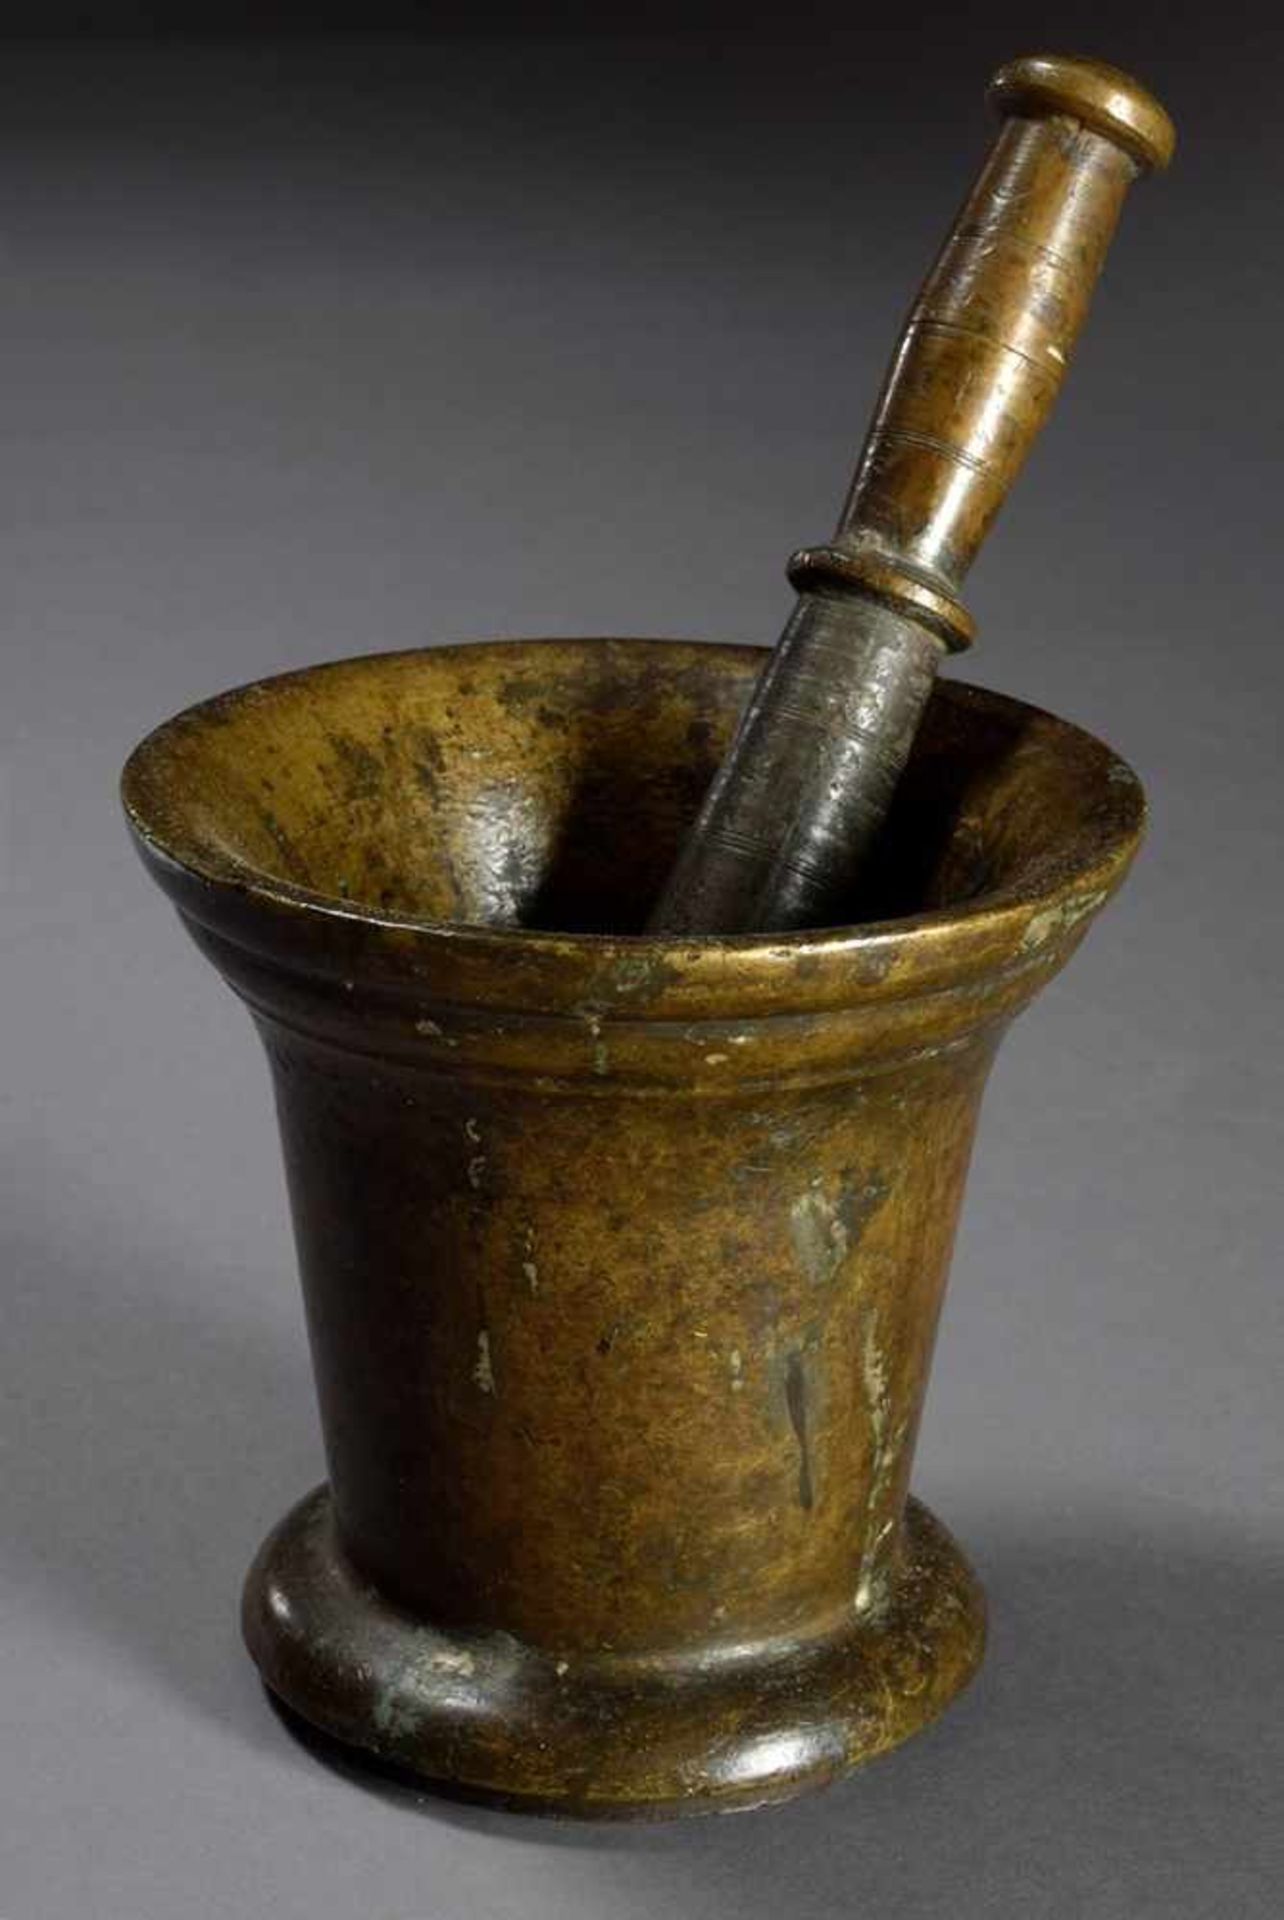 Heavy bronze mortar with funnel-shaped body and overhanging mouth on plate base, probably 17th